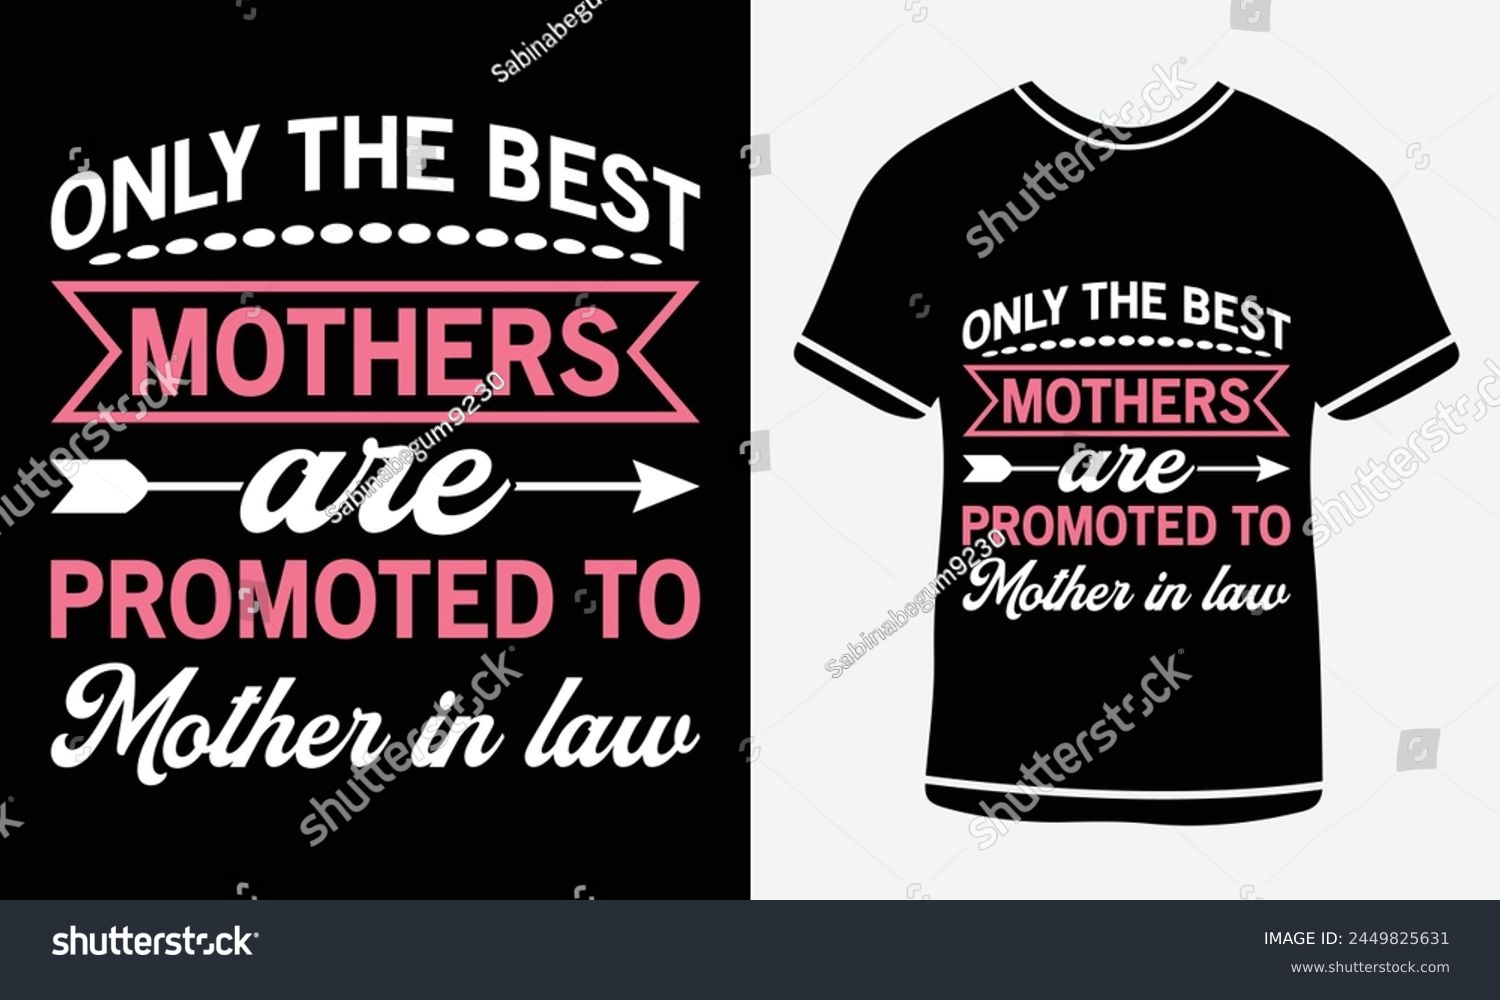 SVG of Mother's day shirt print template, typography design for mom mommy mama daughter grandma girl women aunt mom life child best mom adorable shirt. Gentle nice positive quotes aesthetic design. svg